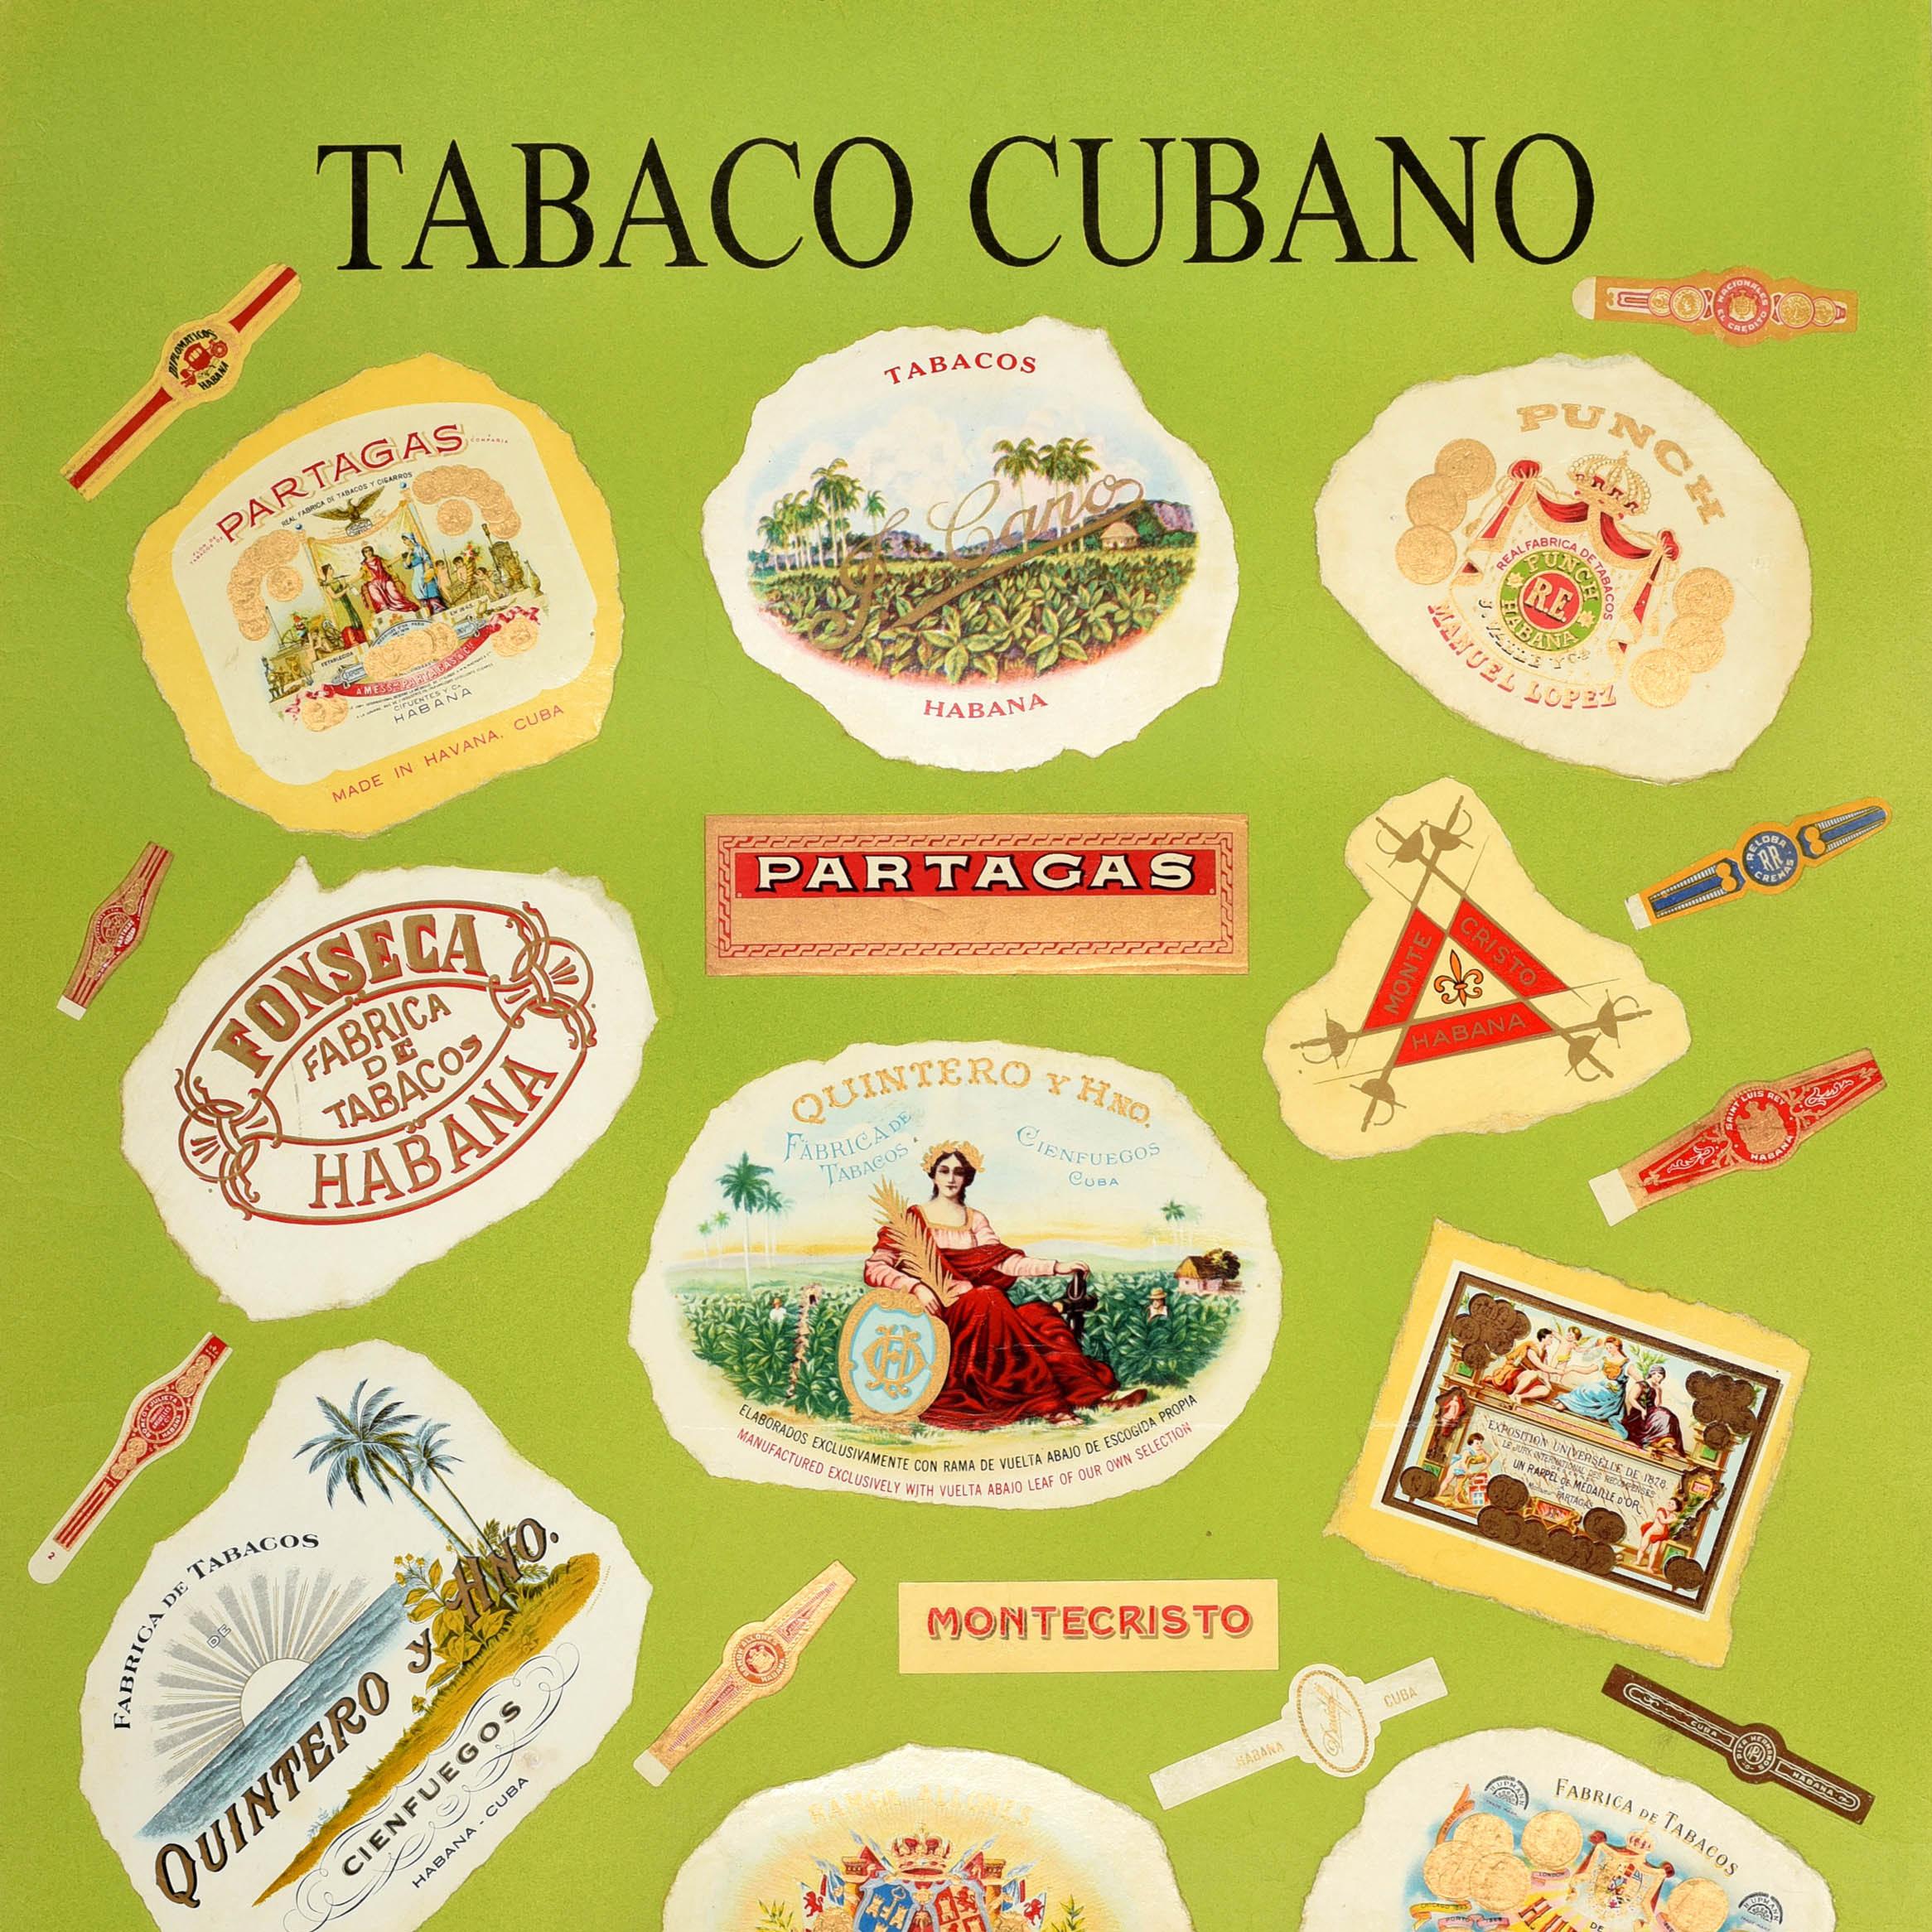 Original Vintage Advertising Poster Cuba Cigars Cuban Tobacco Tabaco Cubano In Good Condition For Sale In London, GB